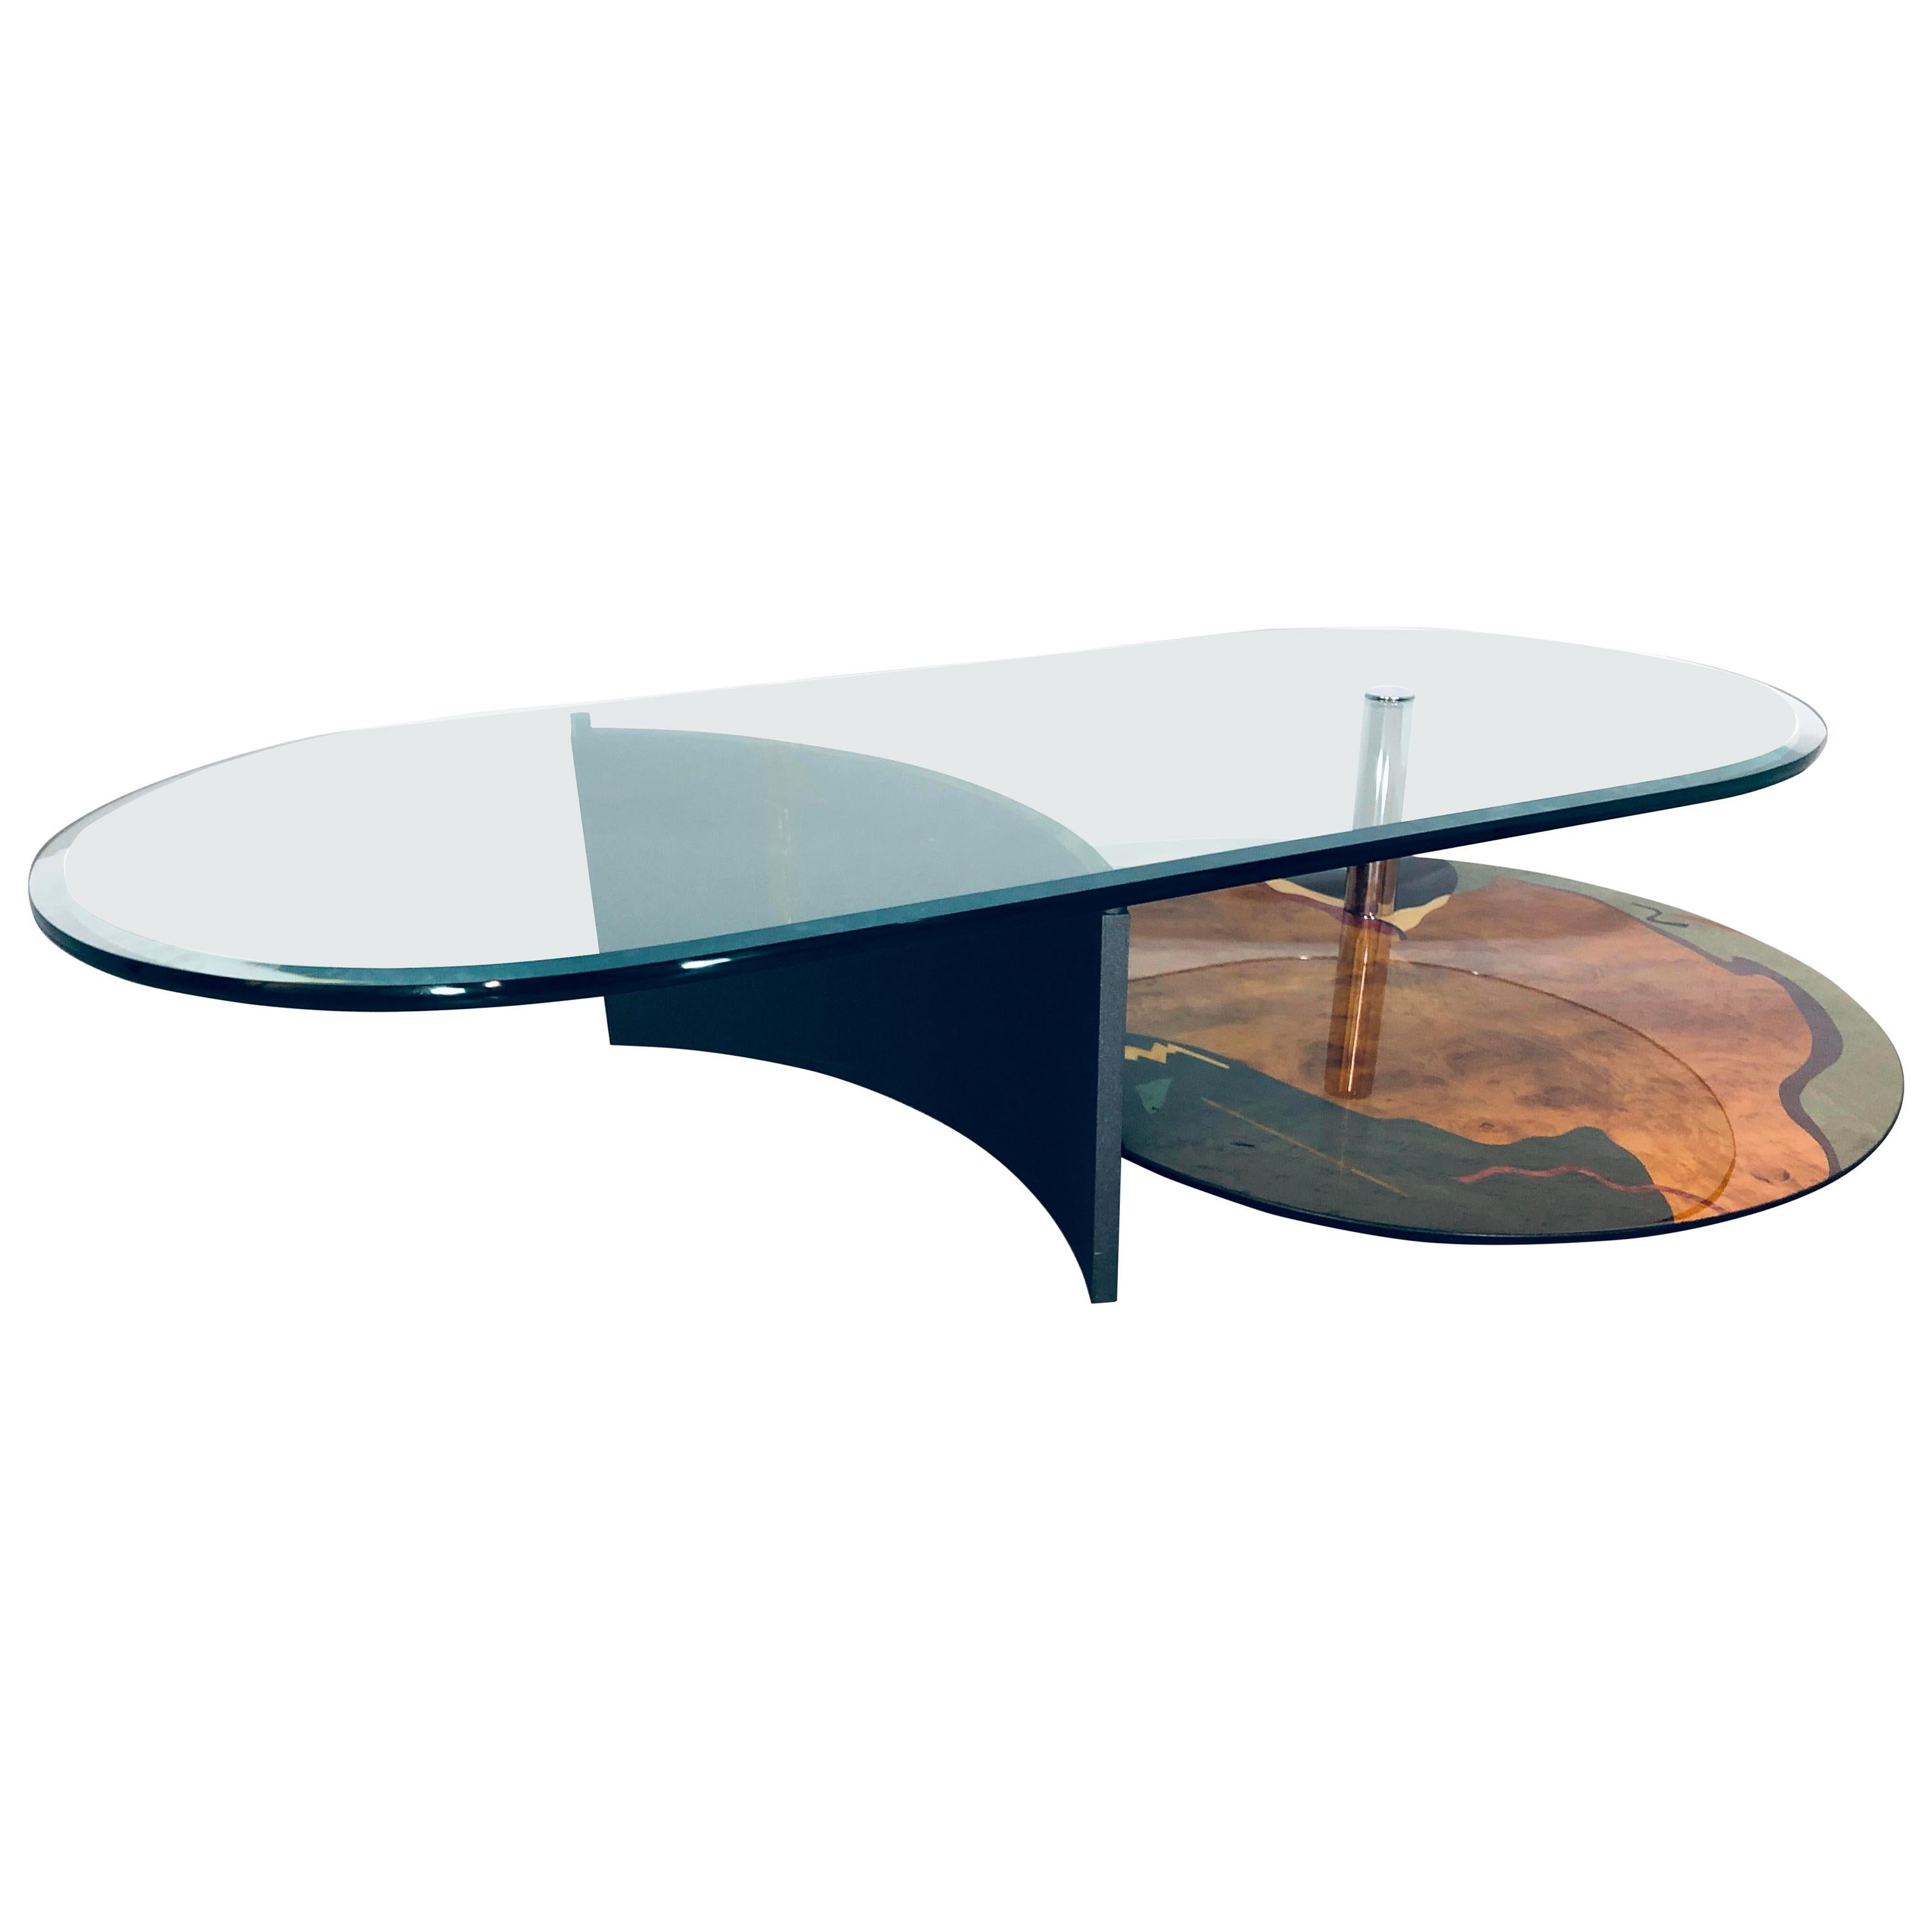 Carlo Malnati Art Coffee Table with Cantilevered Glass Top